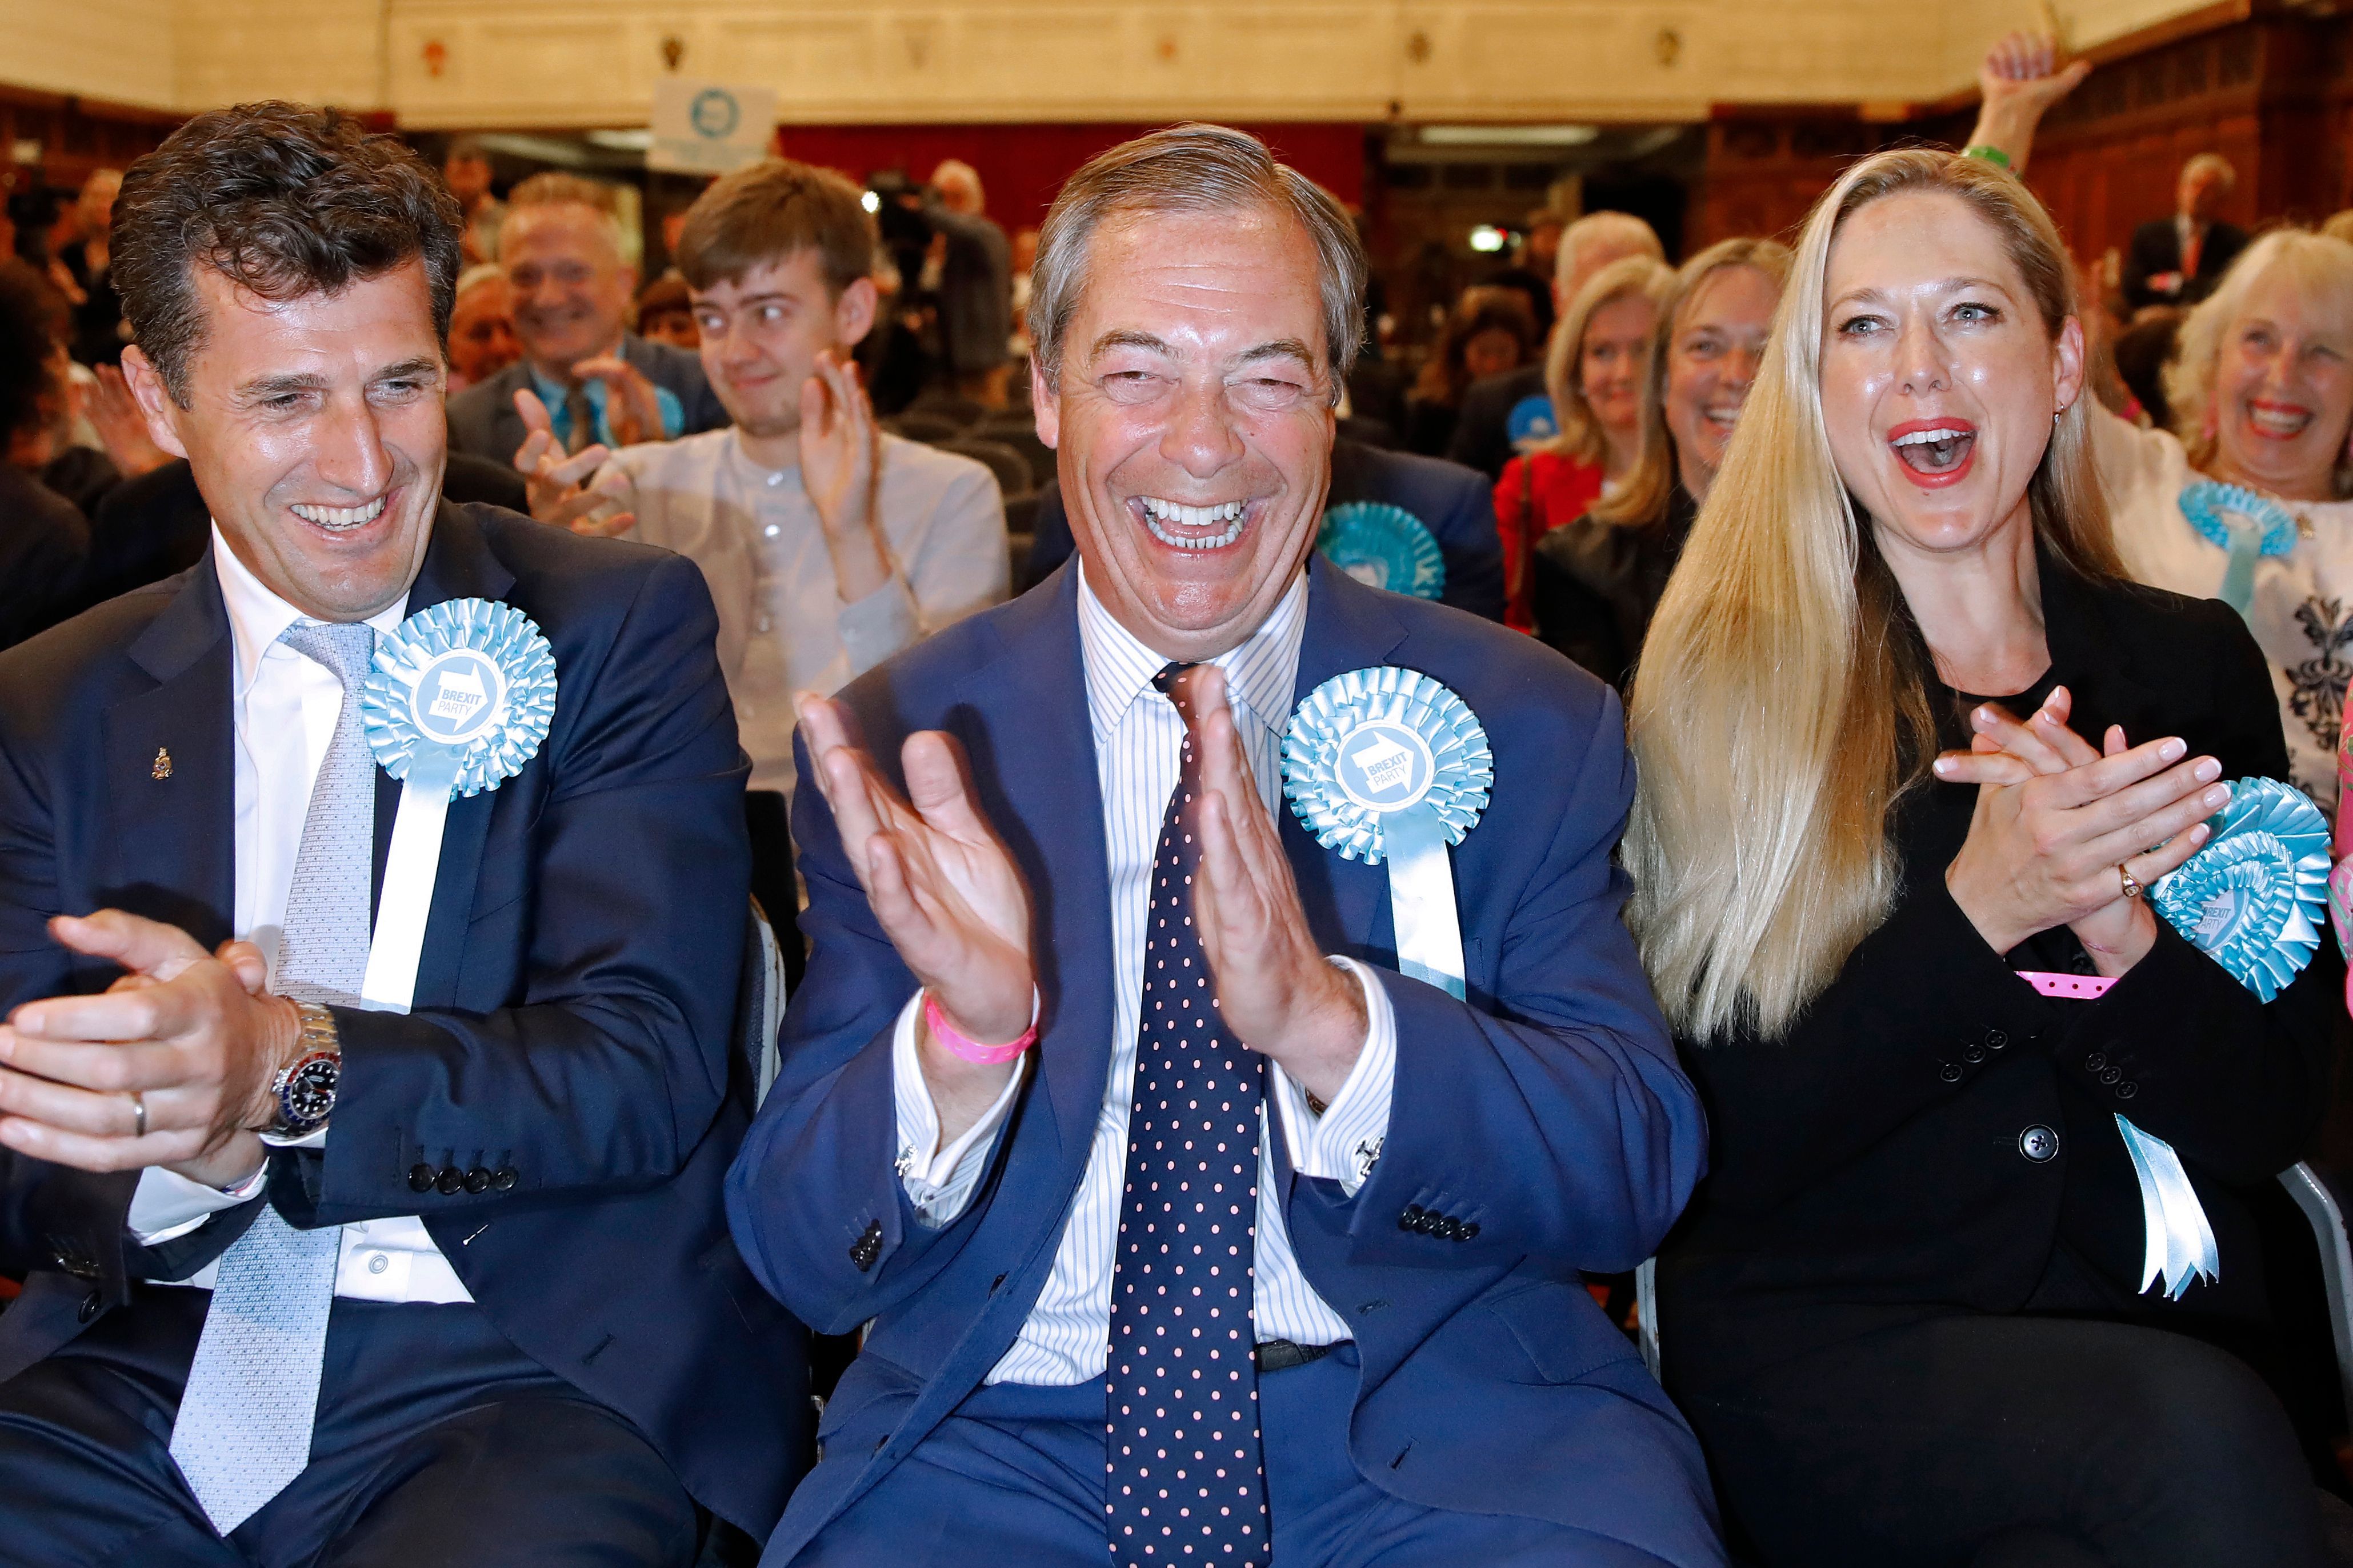 Nigel Farage, leader of the newly formed Brexit Party.